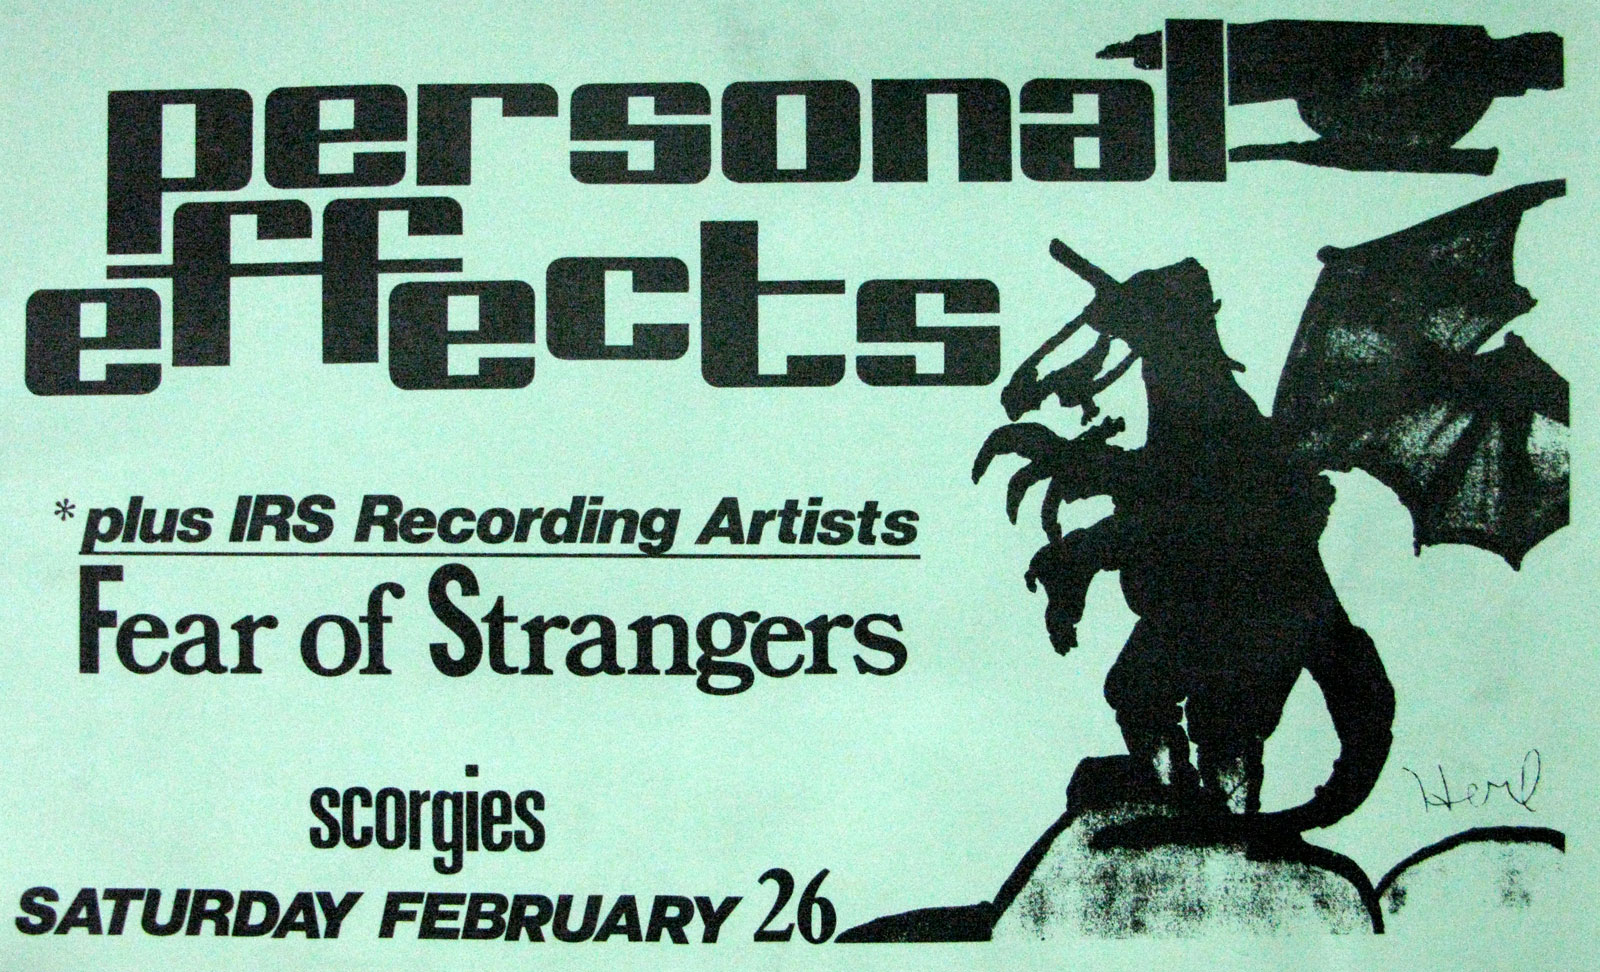 Poster for Personal Effects with Fear of Strangers at Scorgies in Rochester, New York 02.26.1983